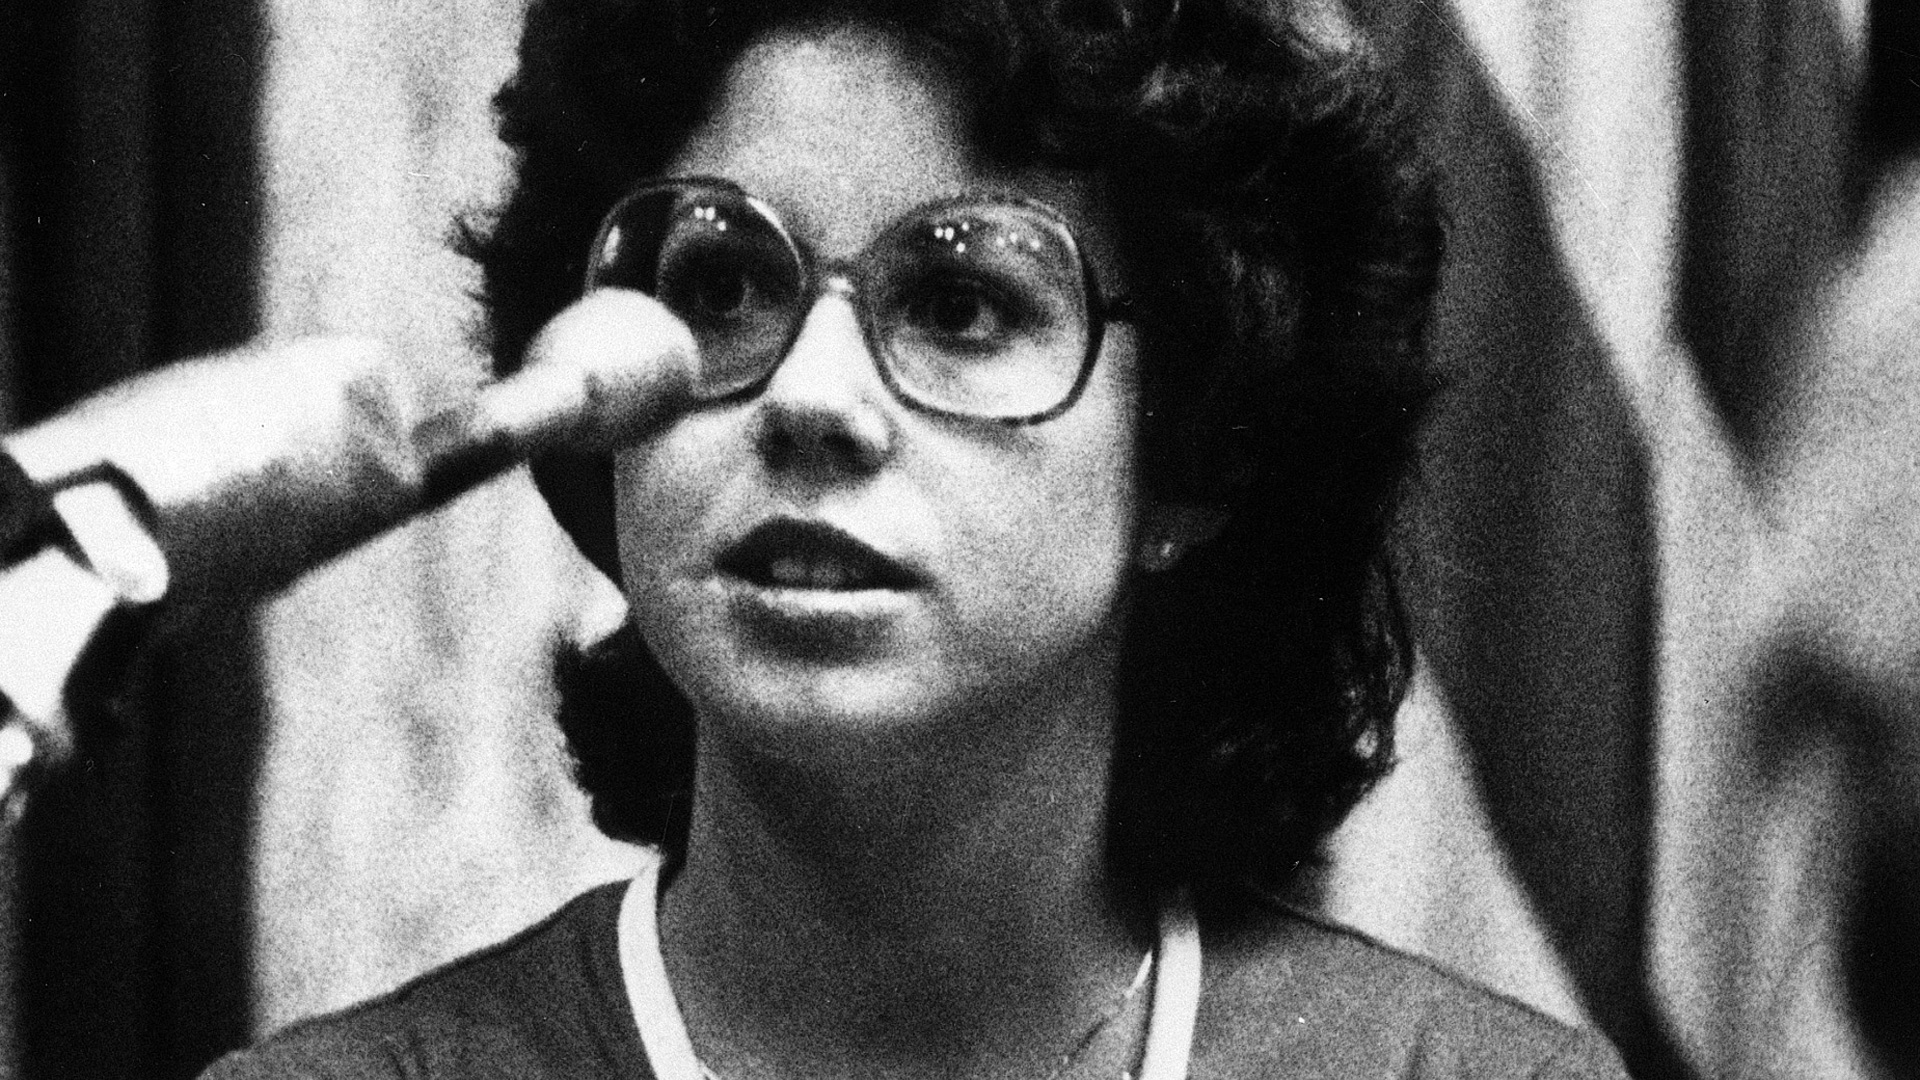 Ted Bundy Survivor Kathy Kleiner Opens Up About the Attack, Her Recovery and Serial Killer Fandom